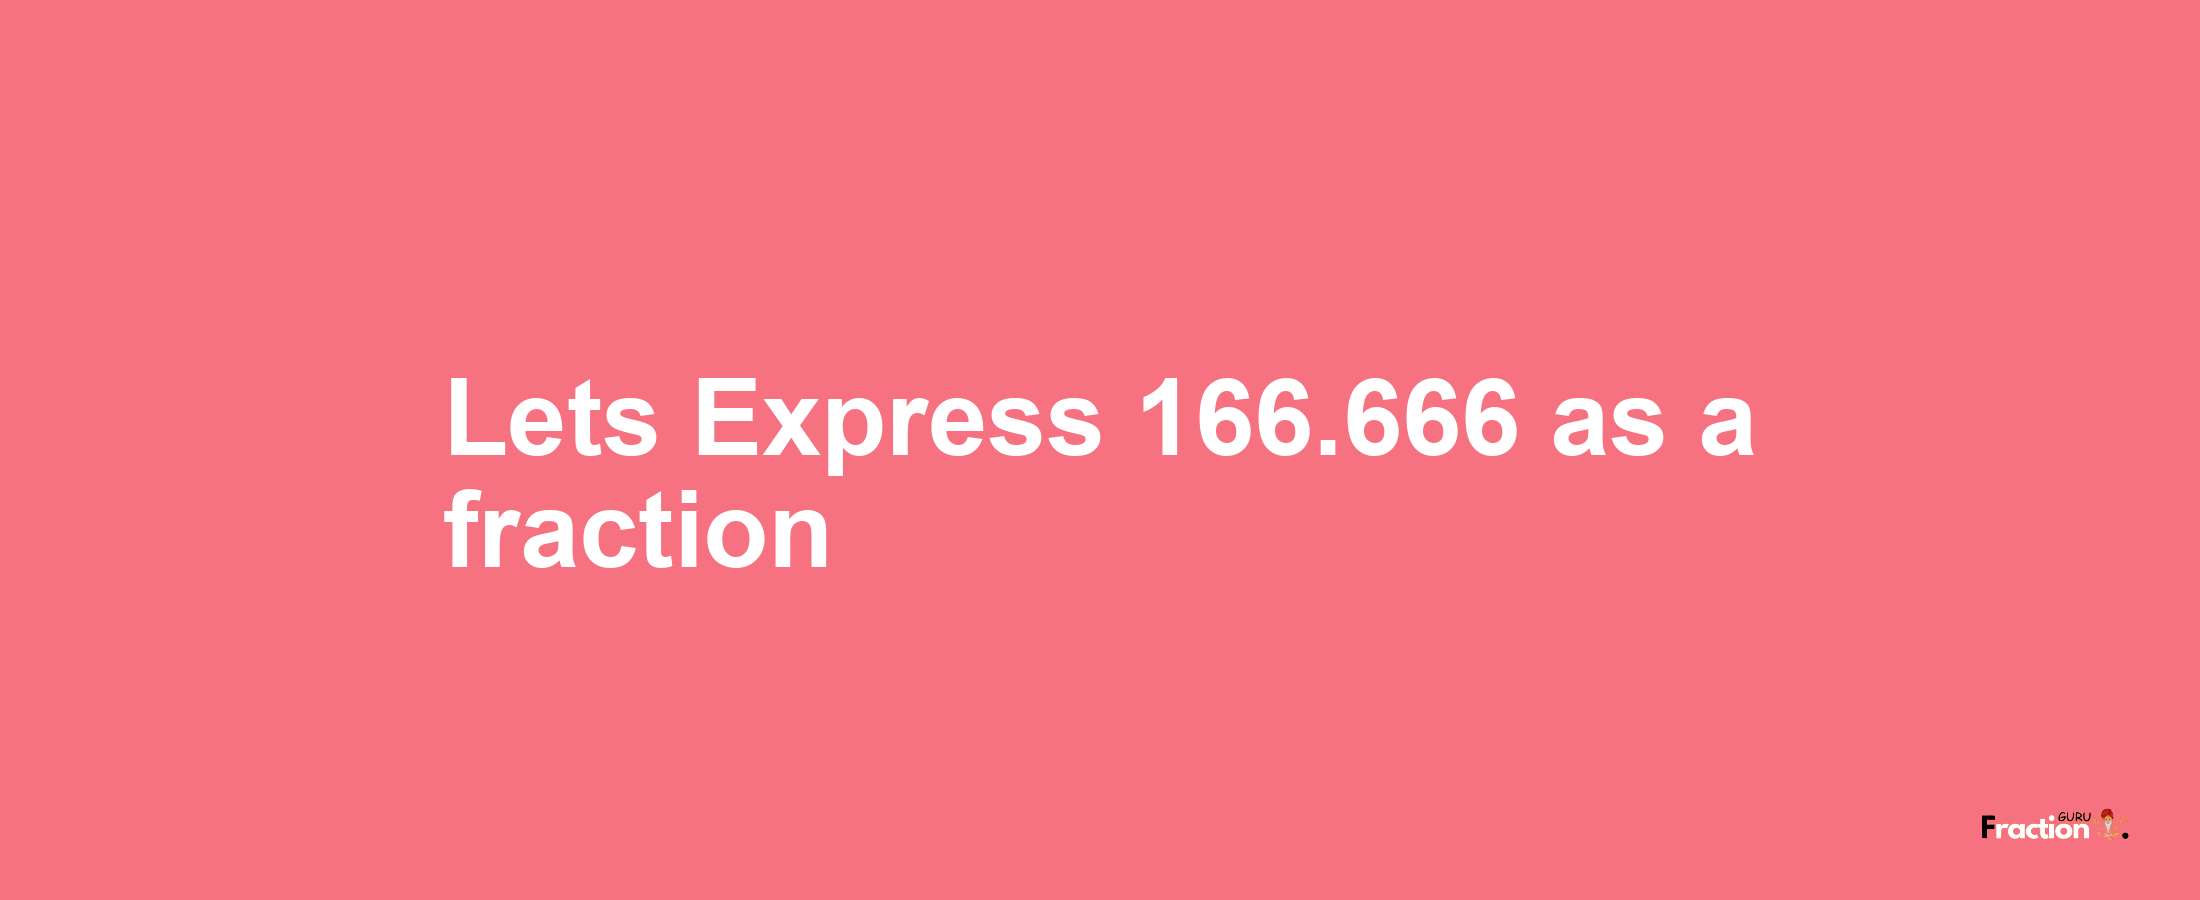 Lets Express 166.666 as afraction